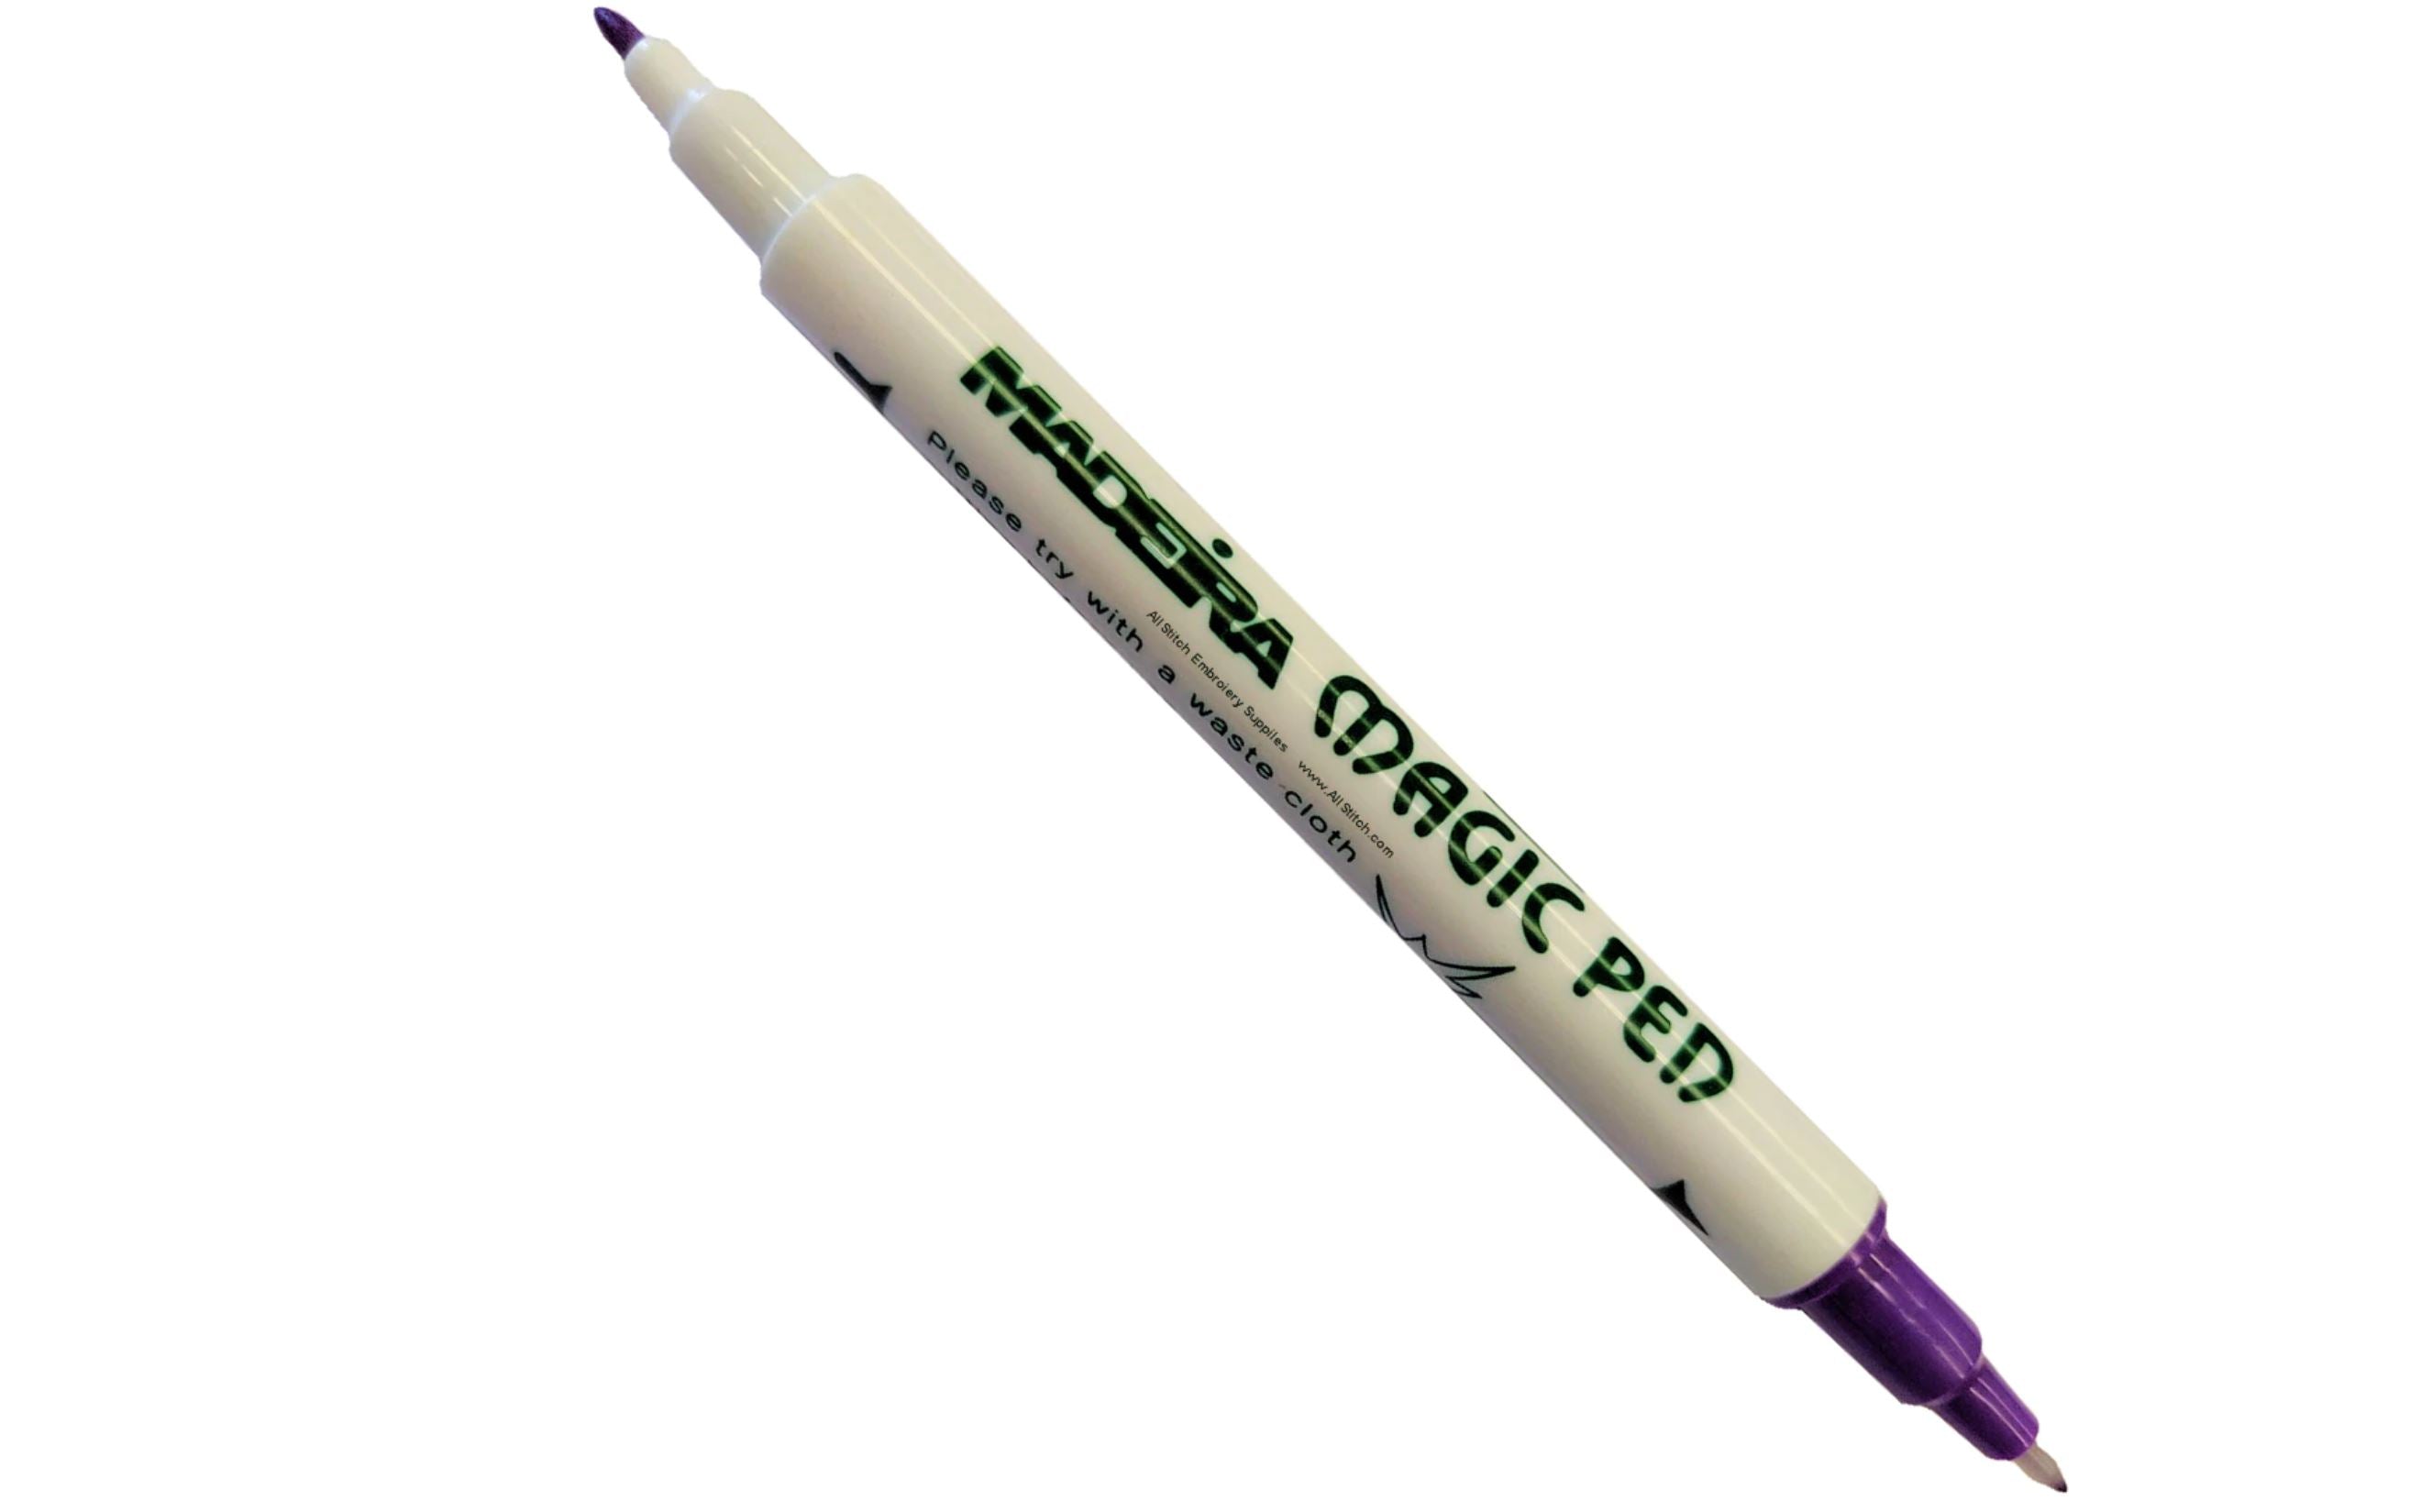 Temporary Fabric Marker, Magic-Pen by MADEIRA – Blanks for Crafters